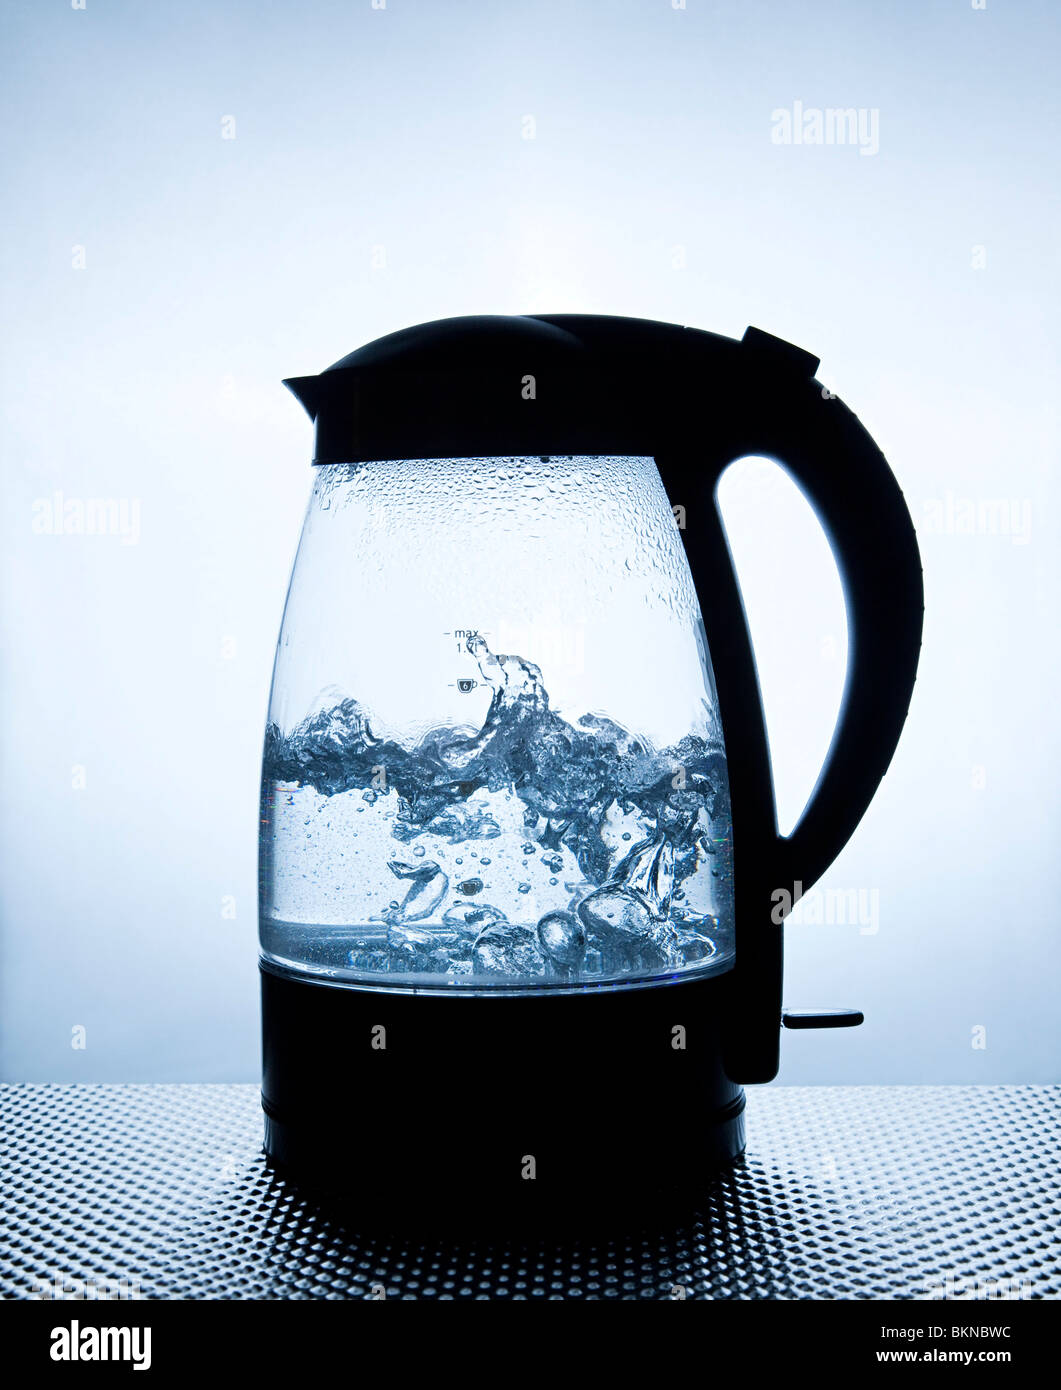 2.5L Electric Glass Kettle, Water Kettle with Illuminated Led